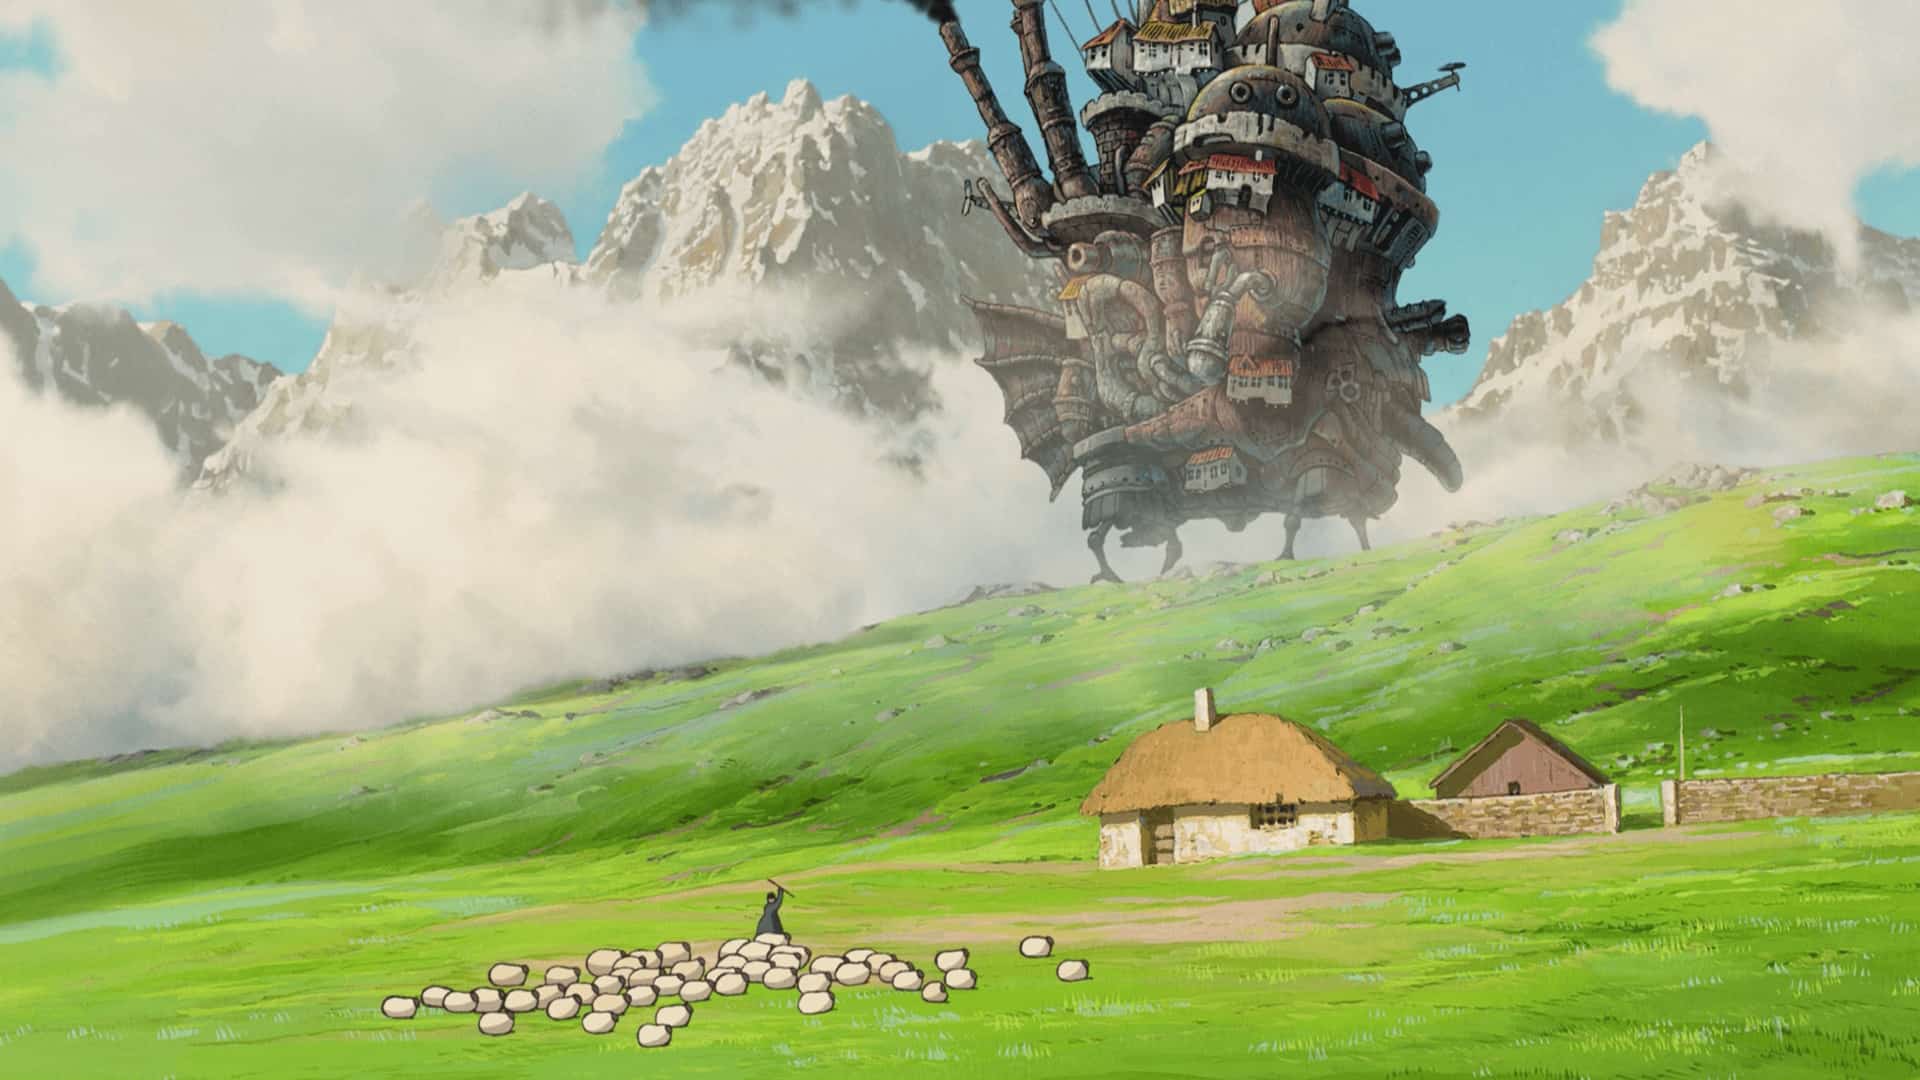 Still from the film Howl's moving Castle